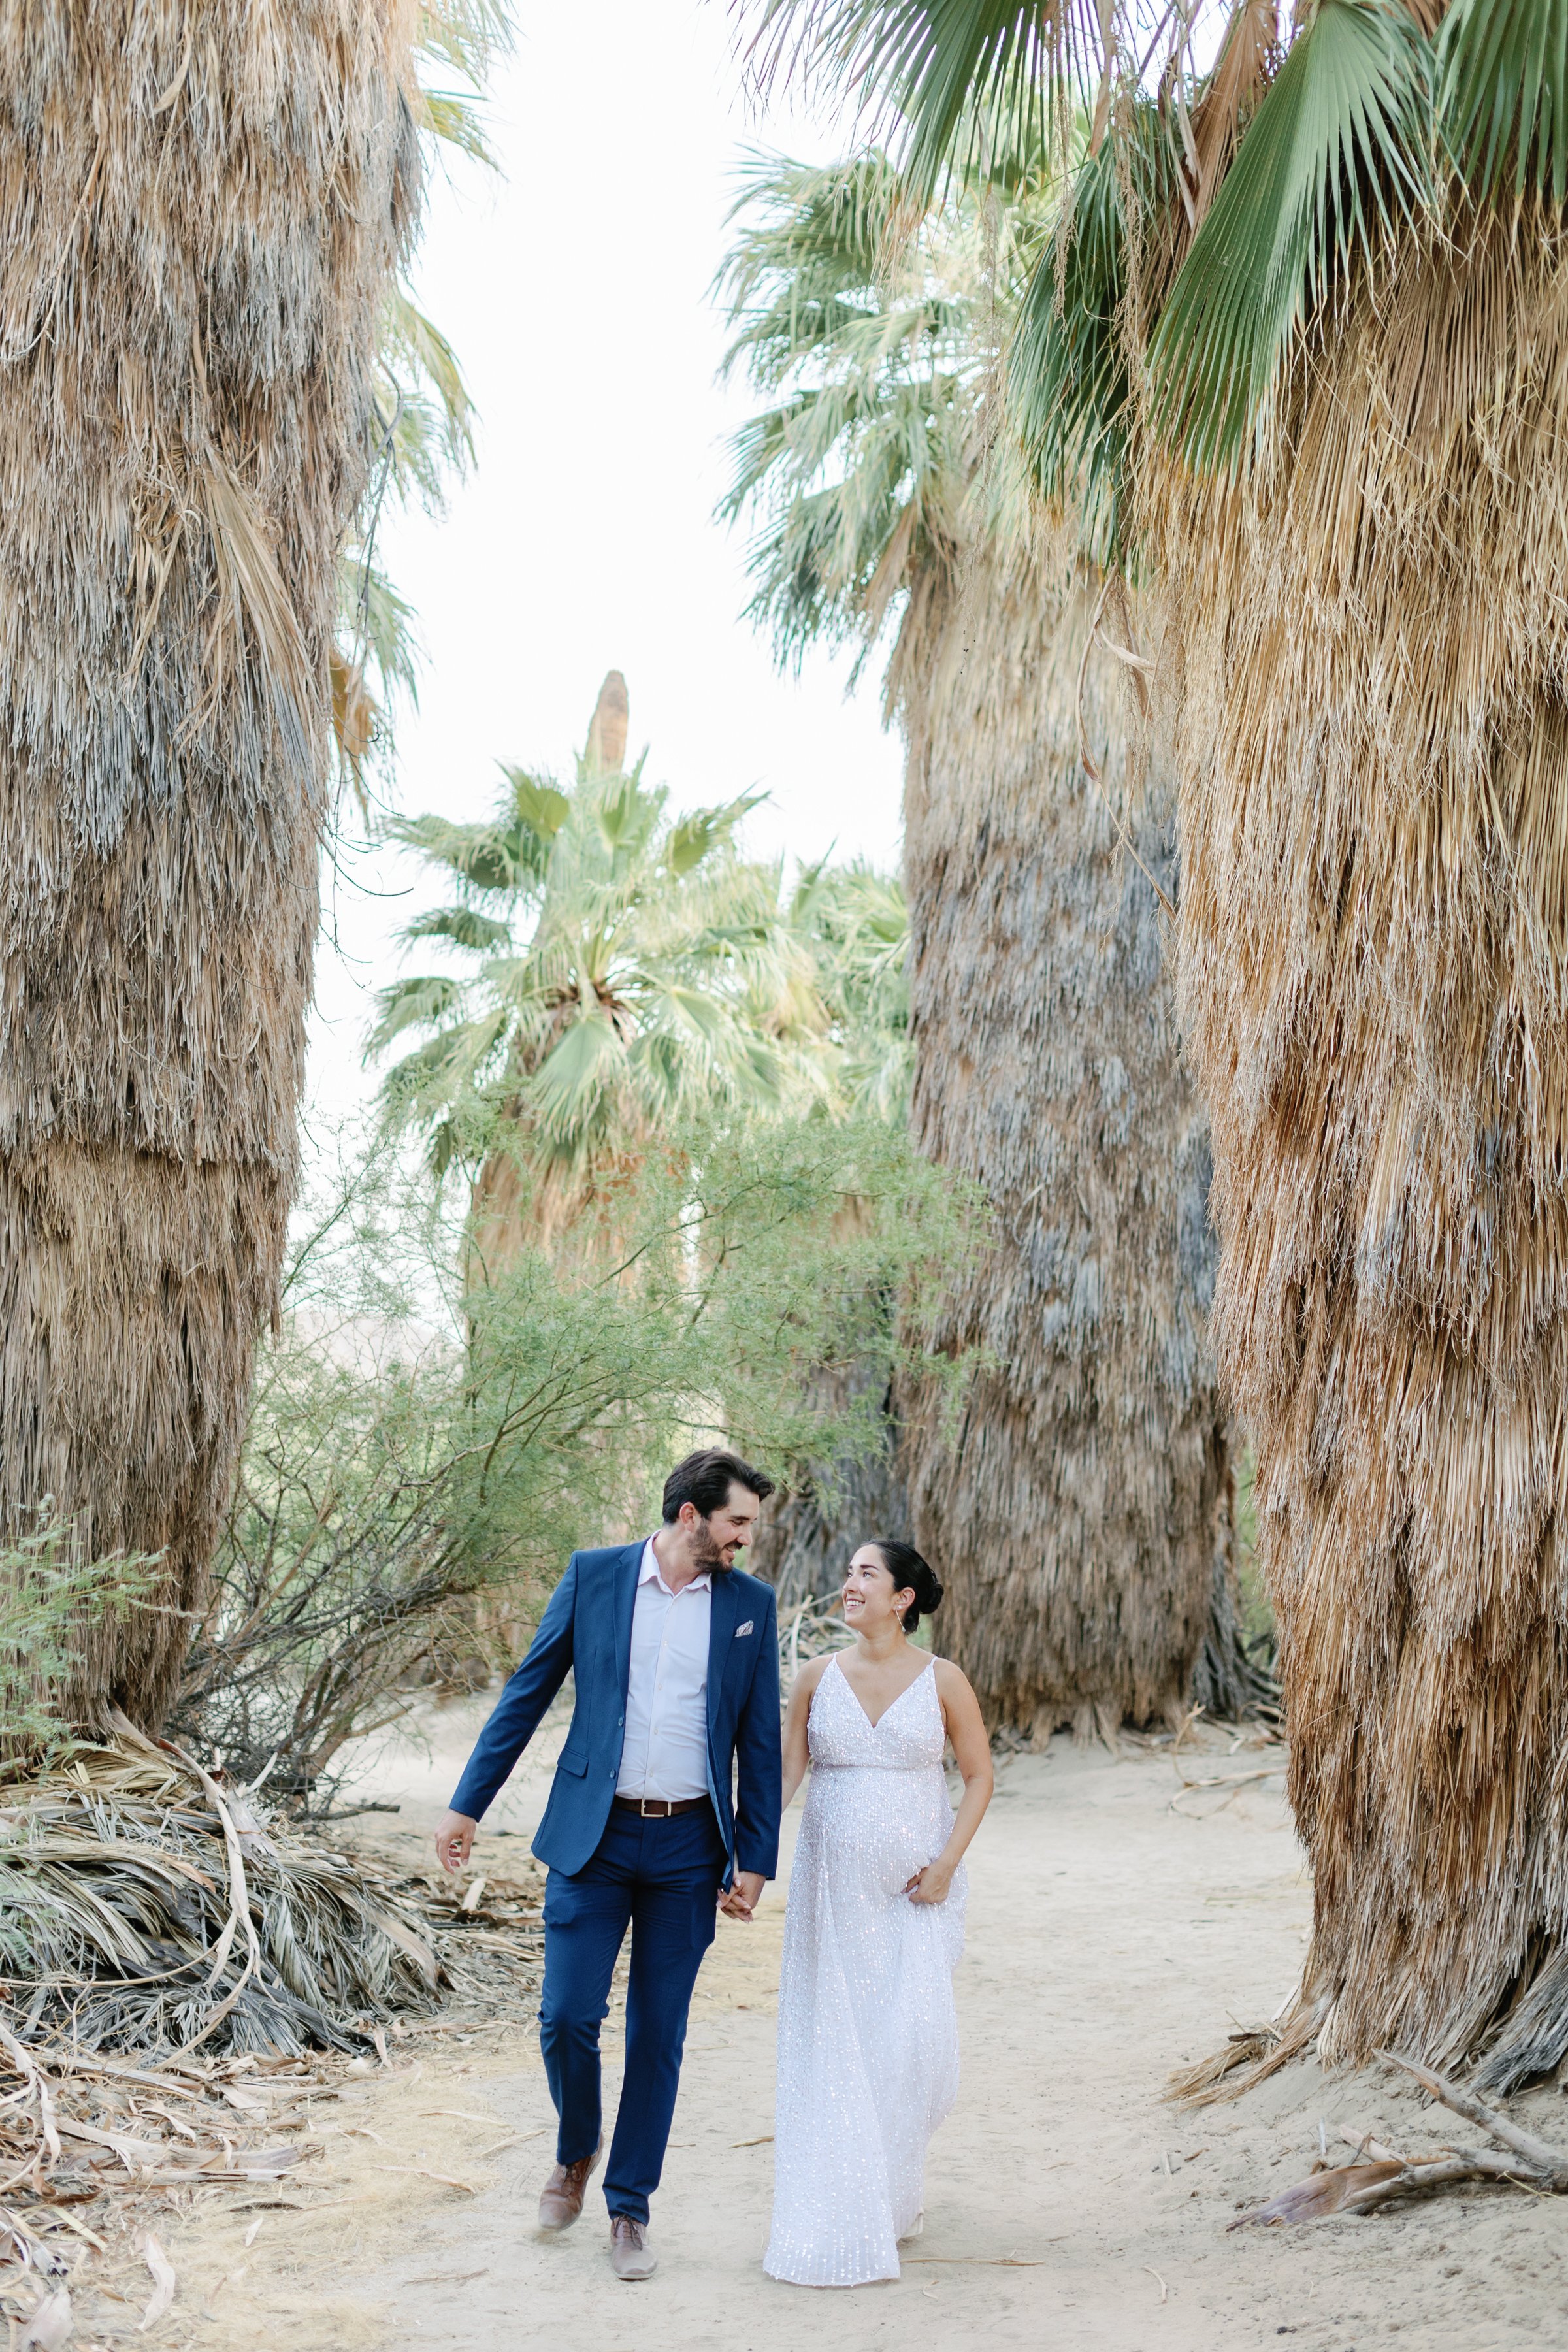 Natalie and Ricardo's Thousand Palm Oasis Elopement-15.jpg